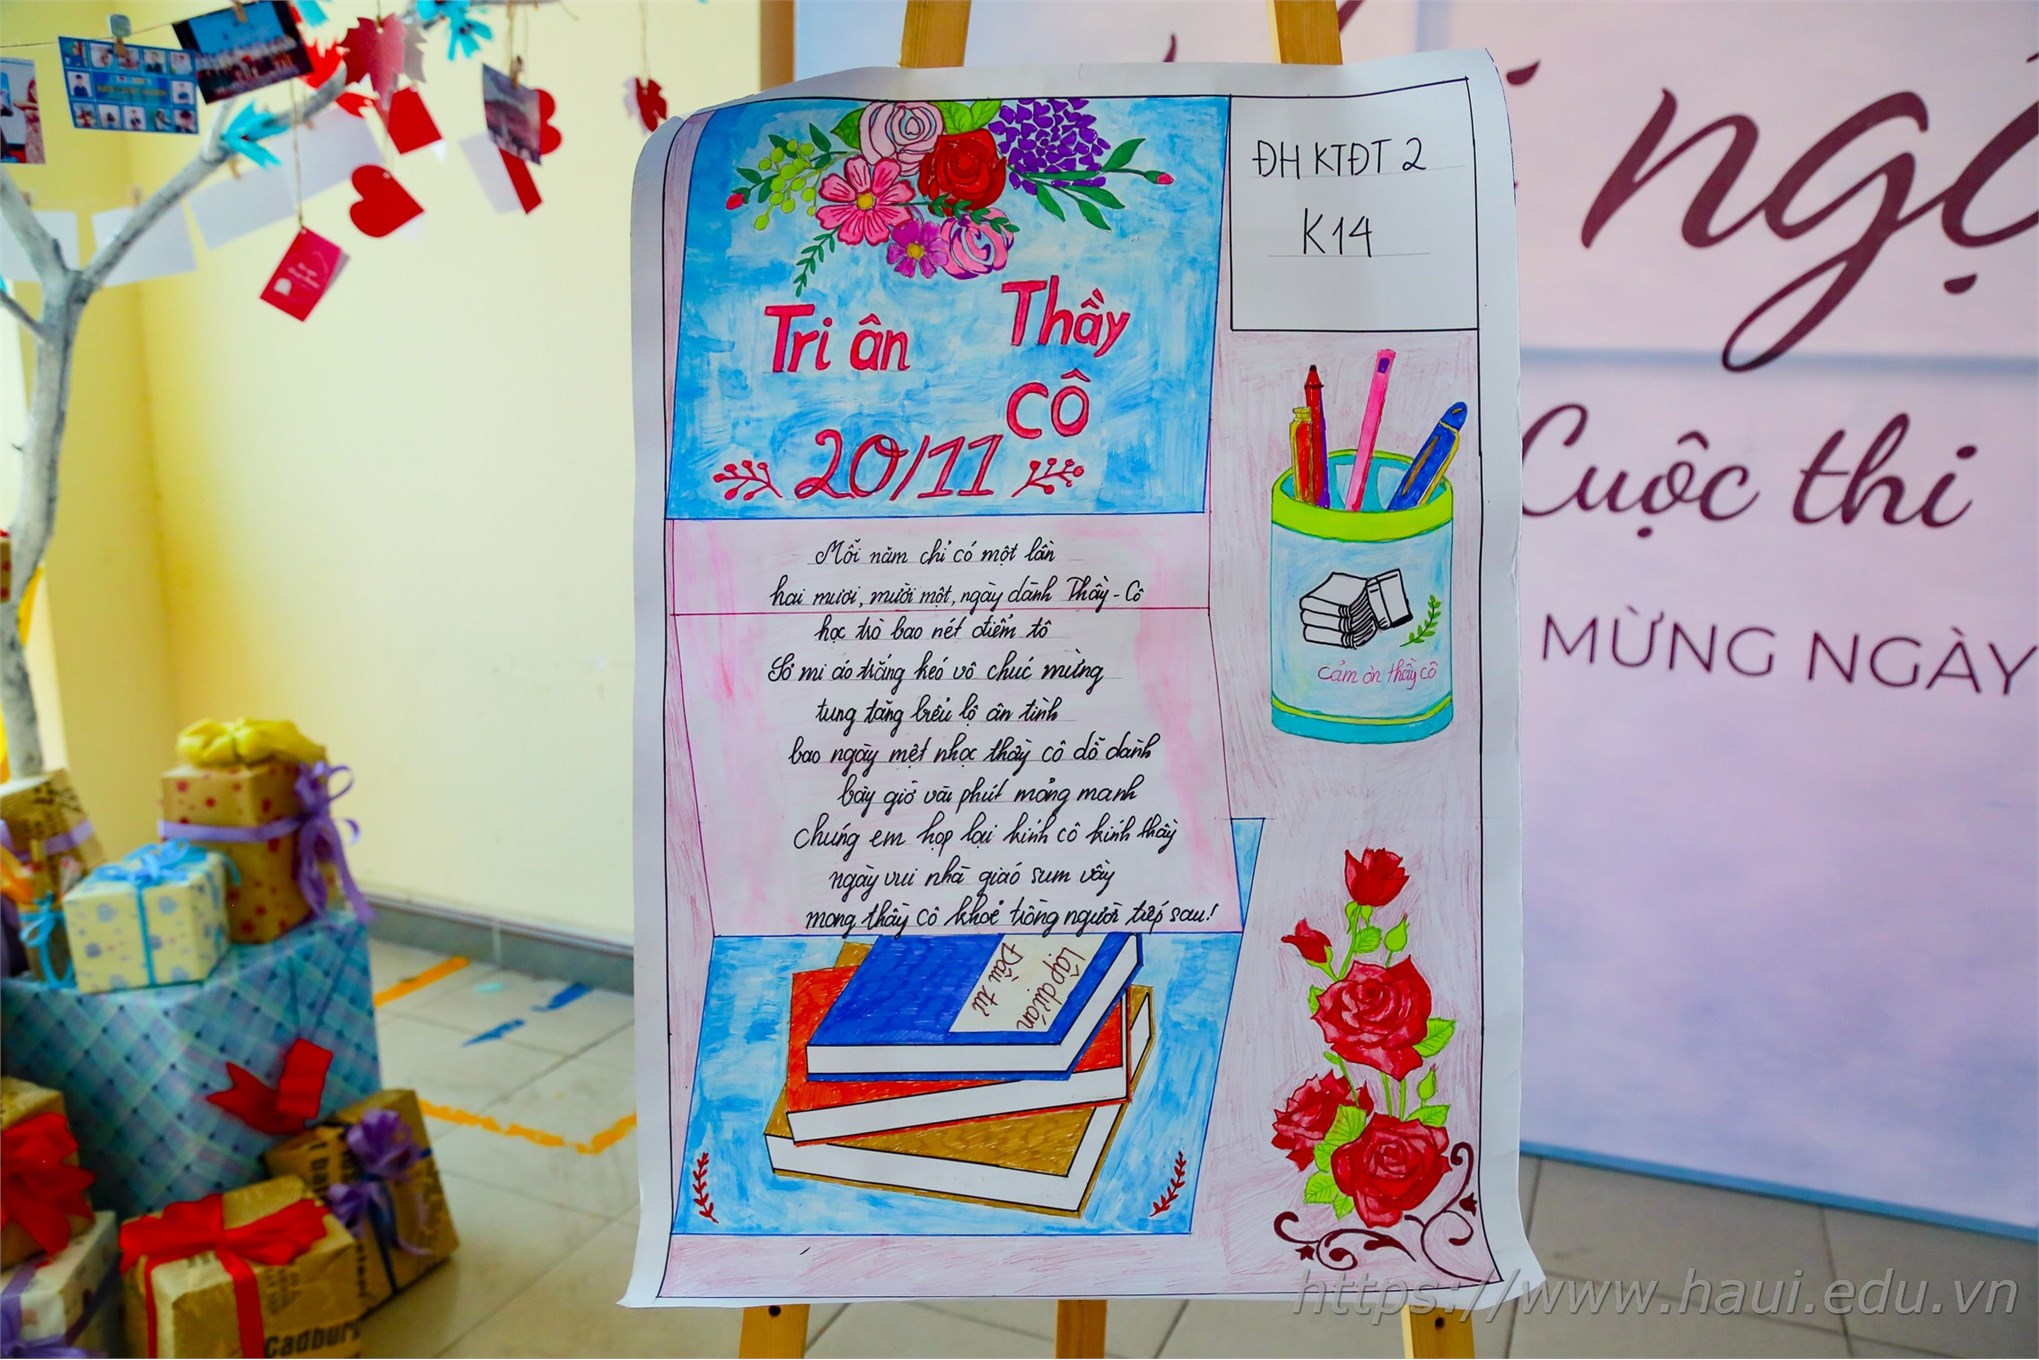 `Greeting Card Designing` contest to celebrate Vietnamese Teachers' Day